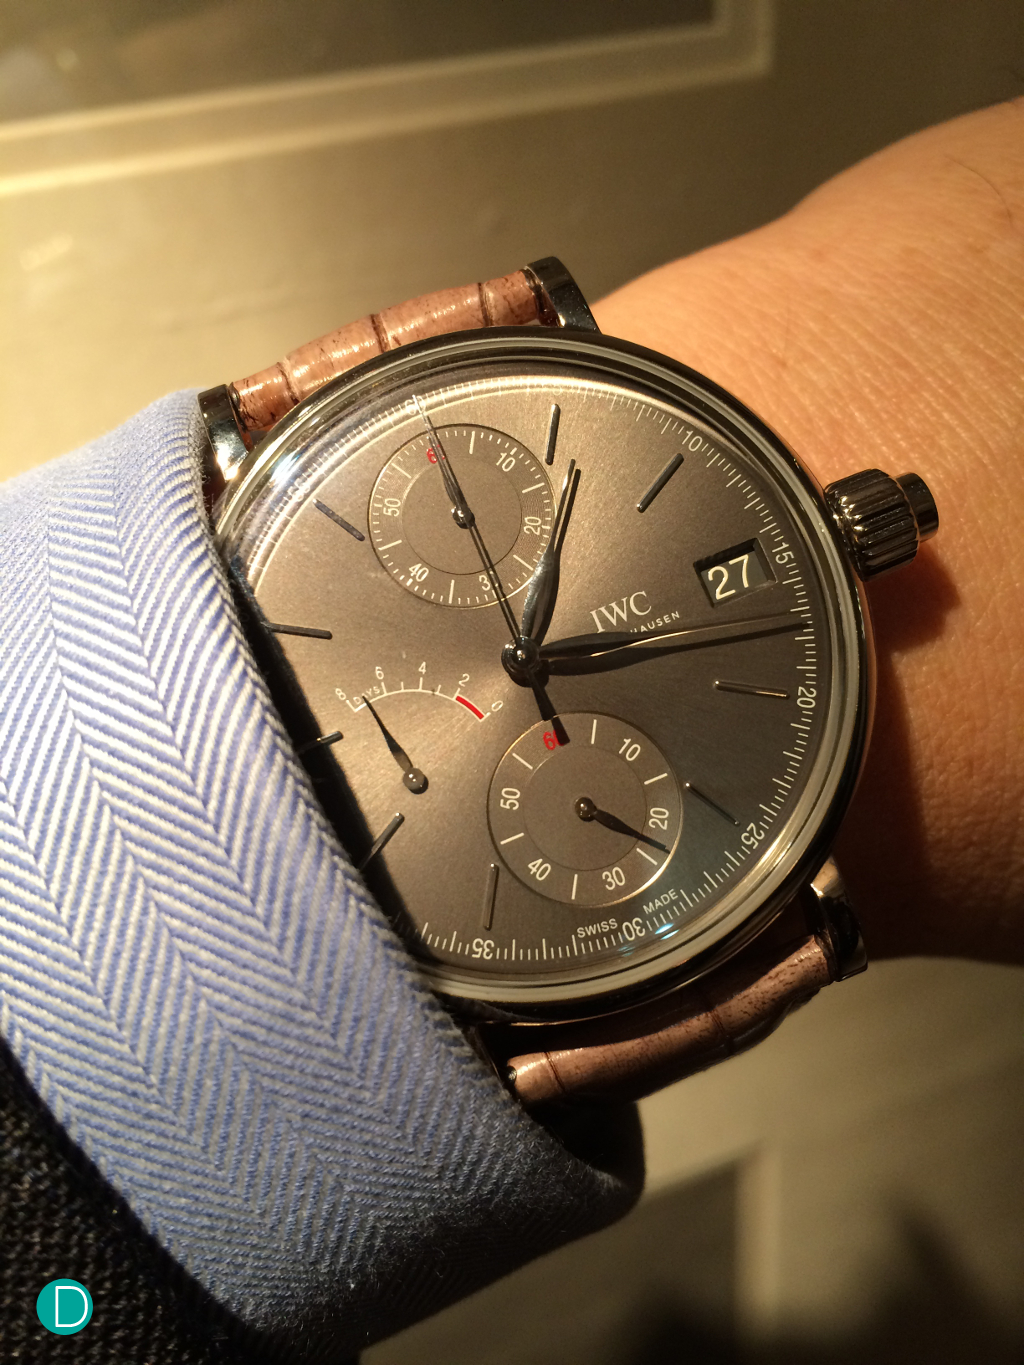 Pre Watches and Wonders 2015: Introducing the IWC Portofino Hand Wound Monopusher Chronograph